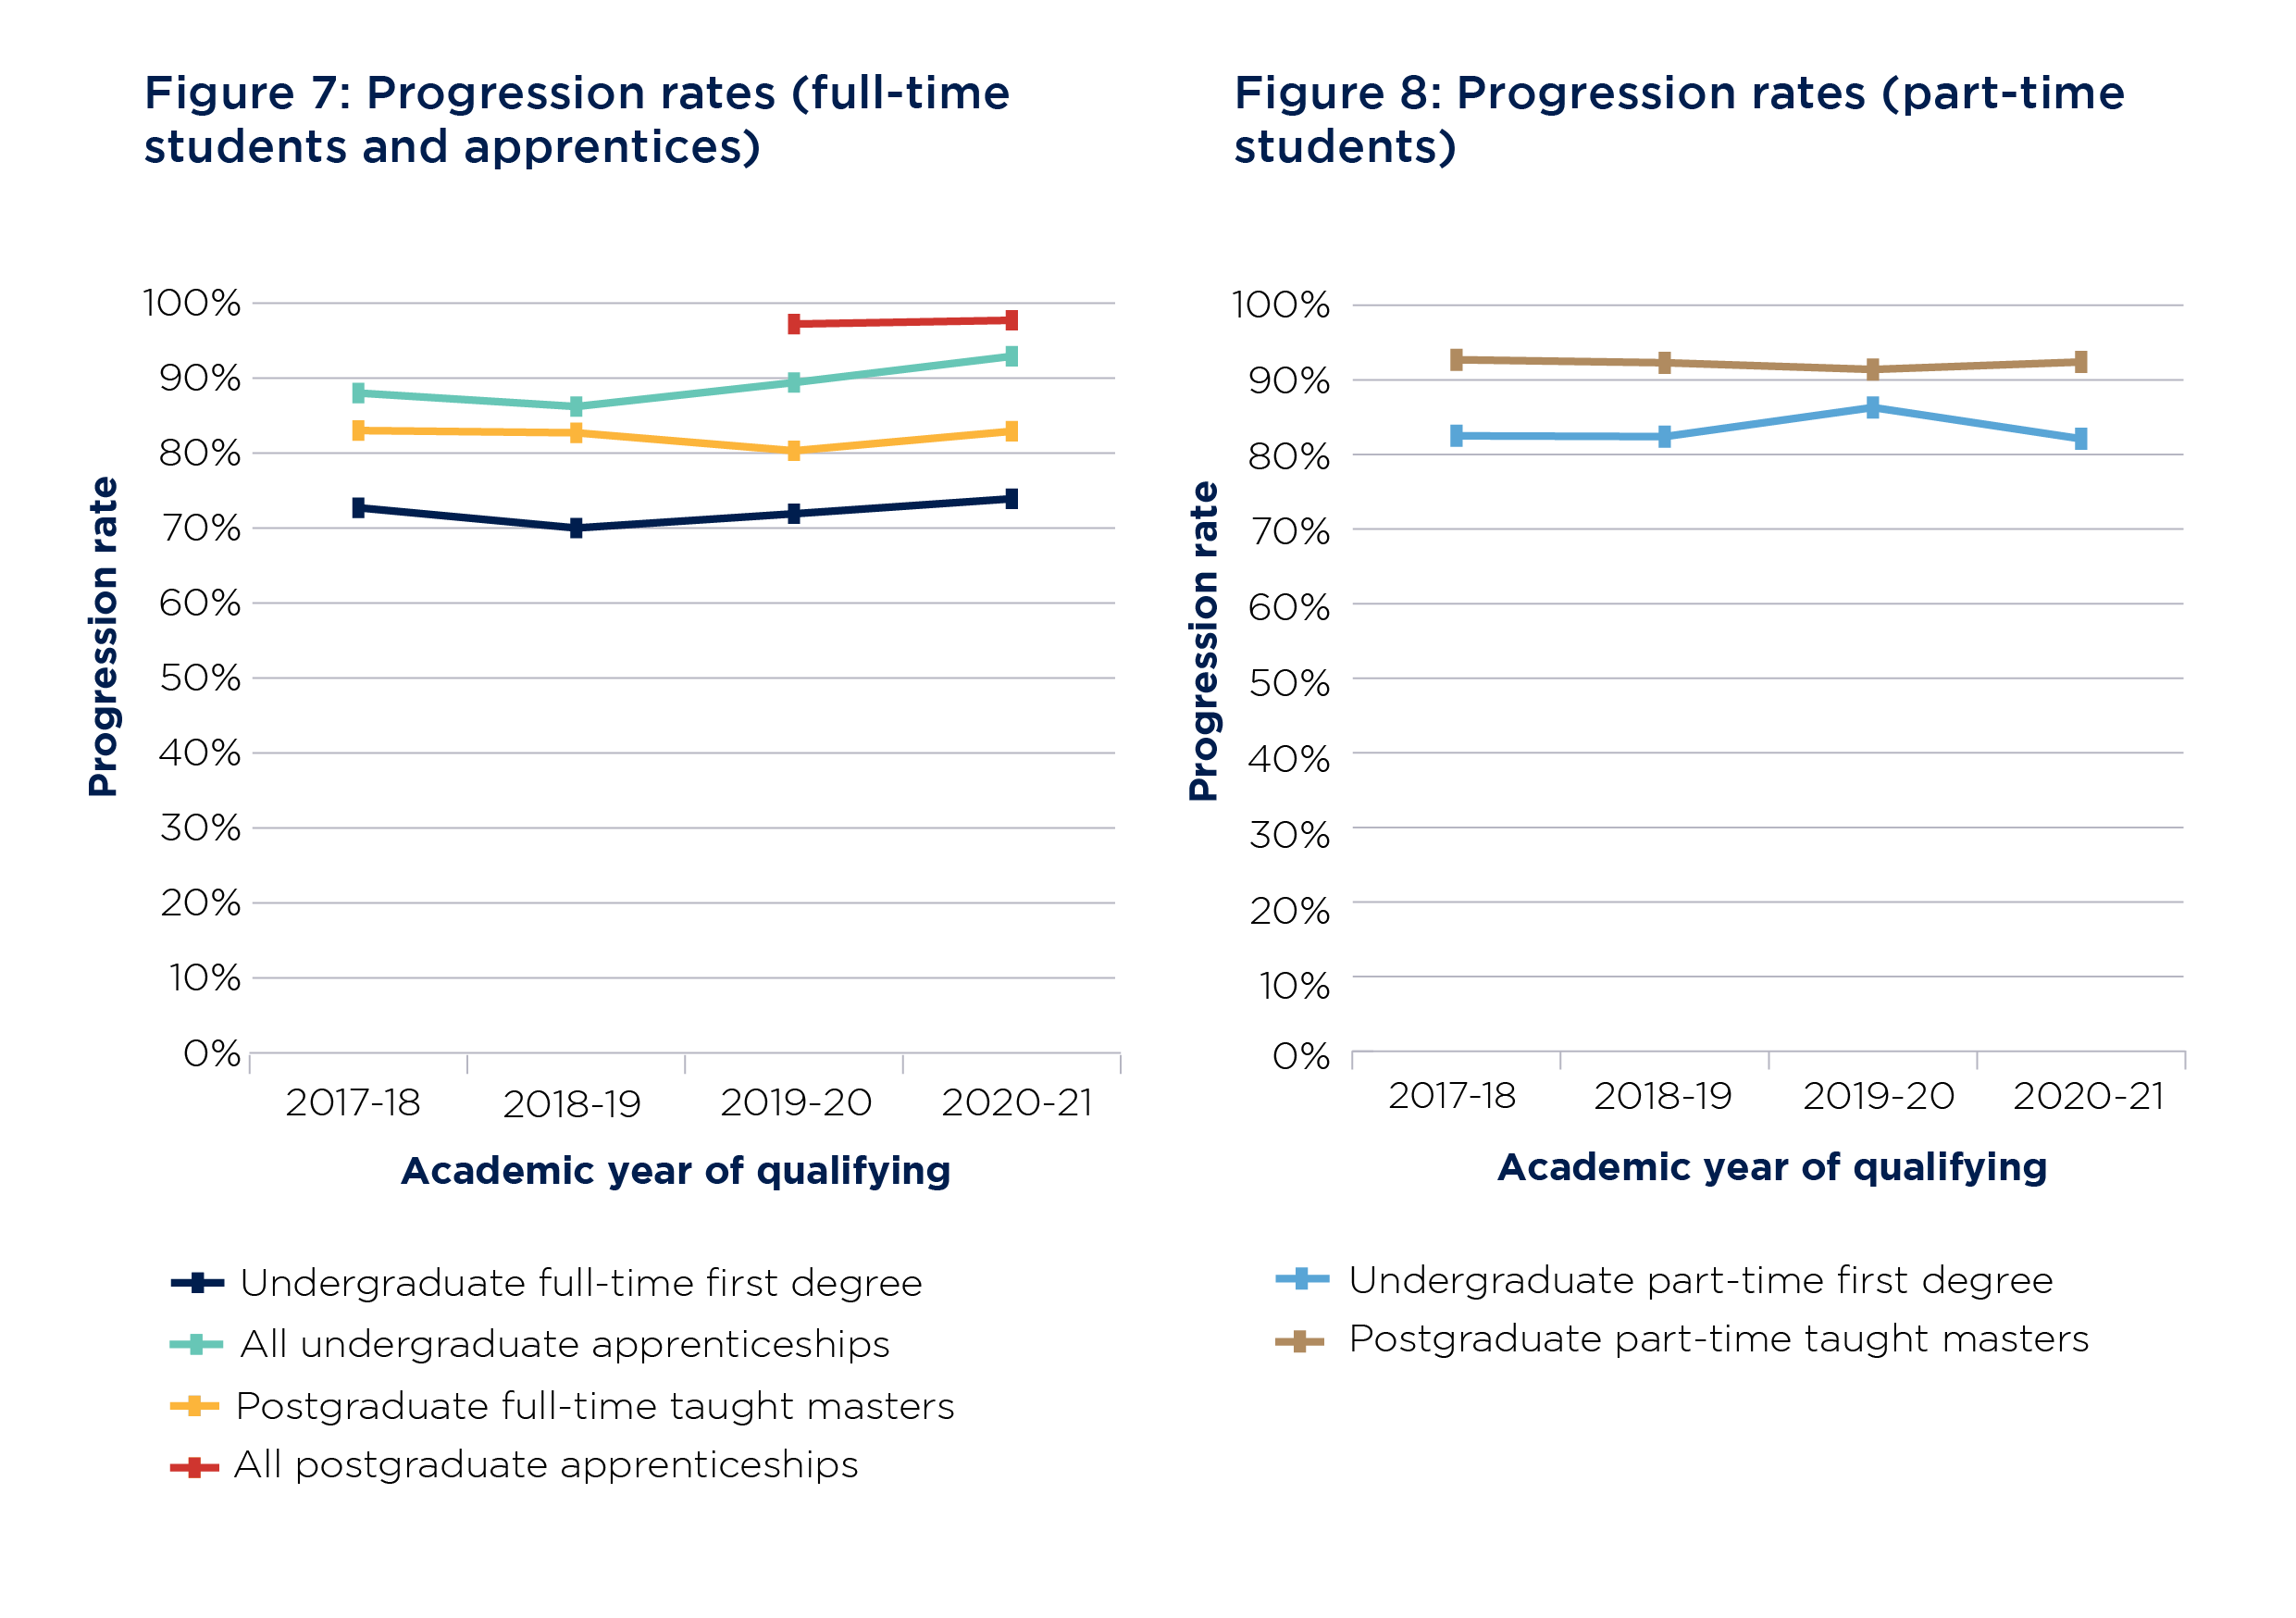 Figure 7 is a quadruple line graph showing progression rates as a percentage for the years of qualifying 2017-18 to 2020-21 for the following groups of students: undergraduate full-time first degree, all undergraduate apprenticeship, postgraduate full-time taught masters, and all postgraduate apprenticeship. Rates of progression for postgraduate apprenticeship students are only available from 2019-20, so this line is shorter than the others. Rates for all undergraduate apprenticeships have risen somewhat during this time, while those for all the other groups have remained roughly steady. Figure 8 is a double line graph showing progression rates as a percentage for the years of qualifying 2017-18 to 2020-21 for the following groups of students: undergraduate part-time first degree and postgraduate part-time taught masters. Both have remained roughly similar over time. The progression rates for part-time students are higher than those for their full-time counterparts shown in Figure 7.